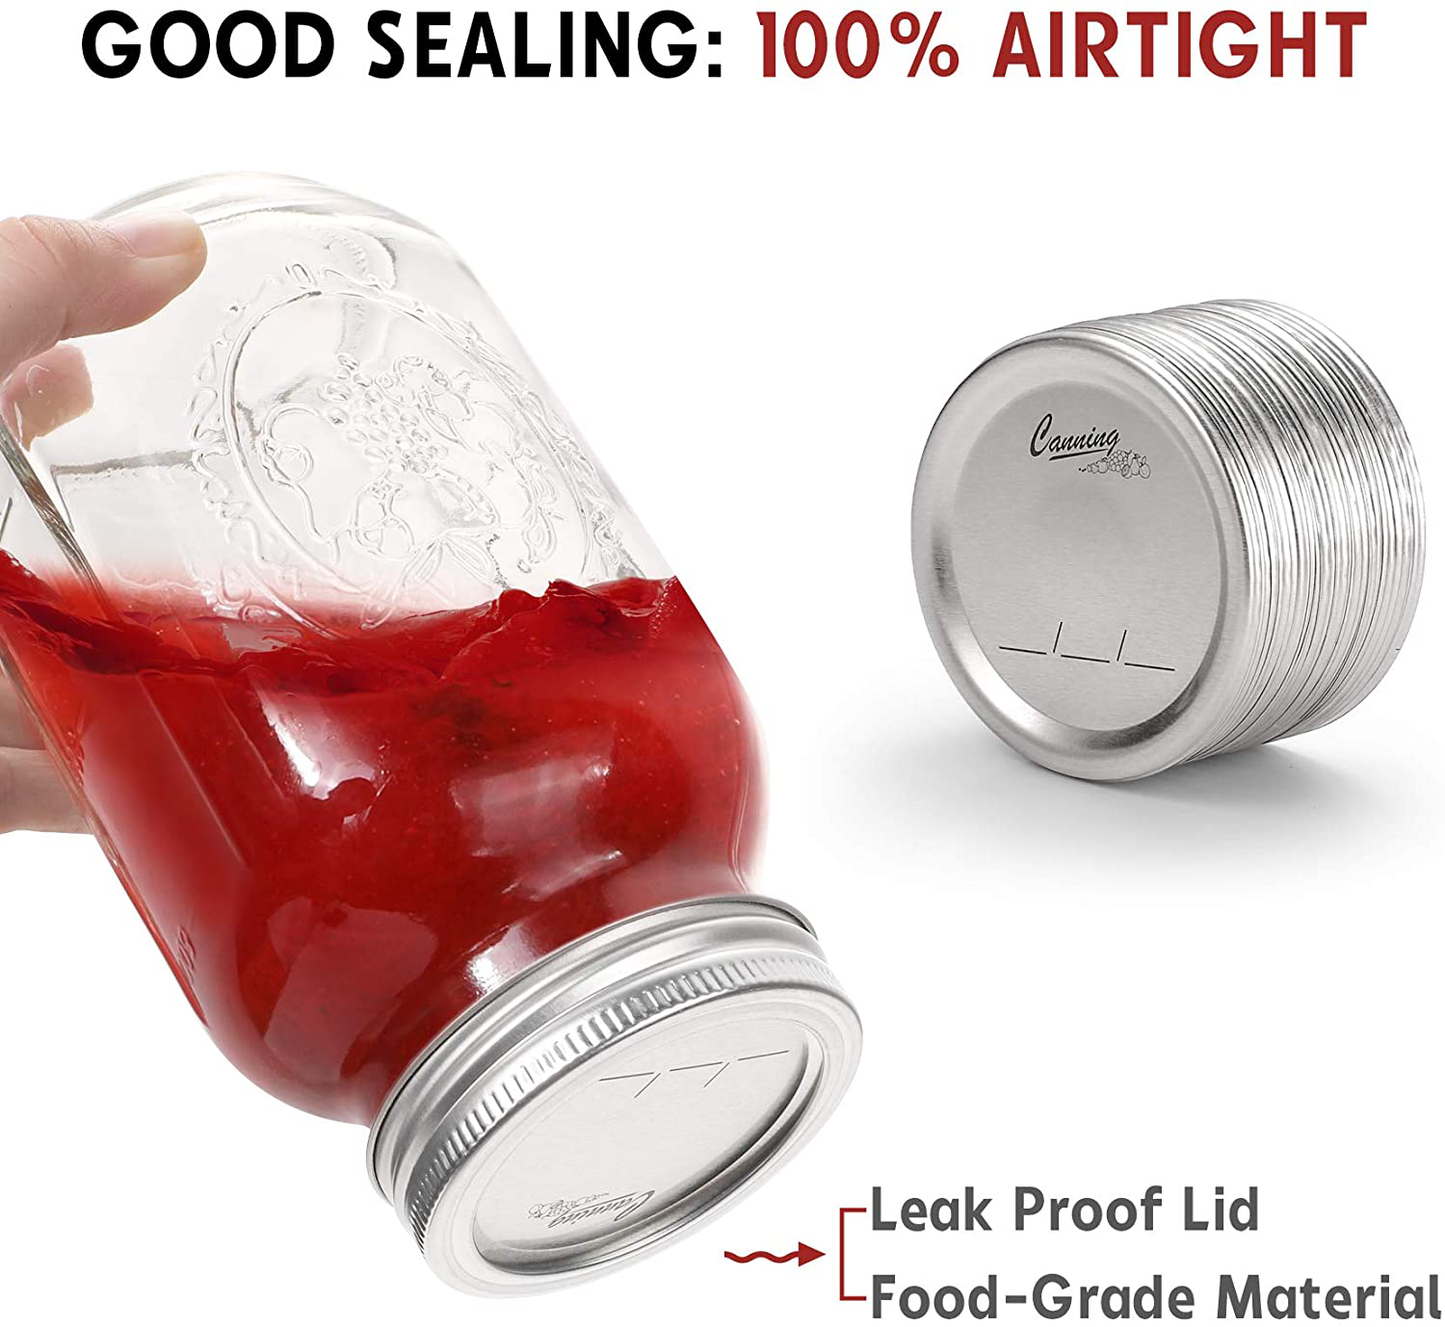 AOZITA 60-Count, [WIDE Mouth] Canning Lids for Ball, Kerr Jars - Split-Type Metal Mason Jar Lids for Canning - Food Grade Material, 100% Fit & Airtight for Wide Mouth Jars